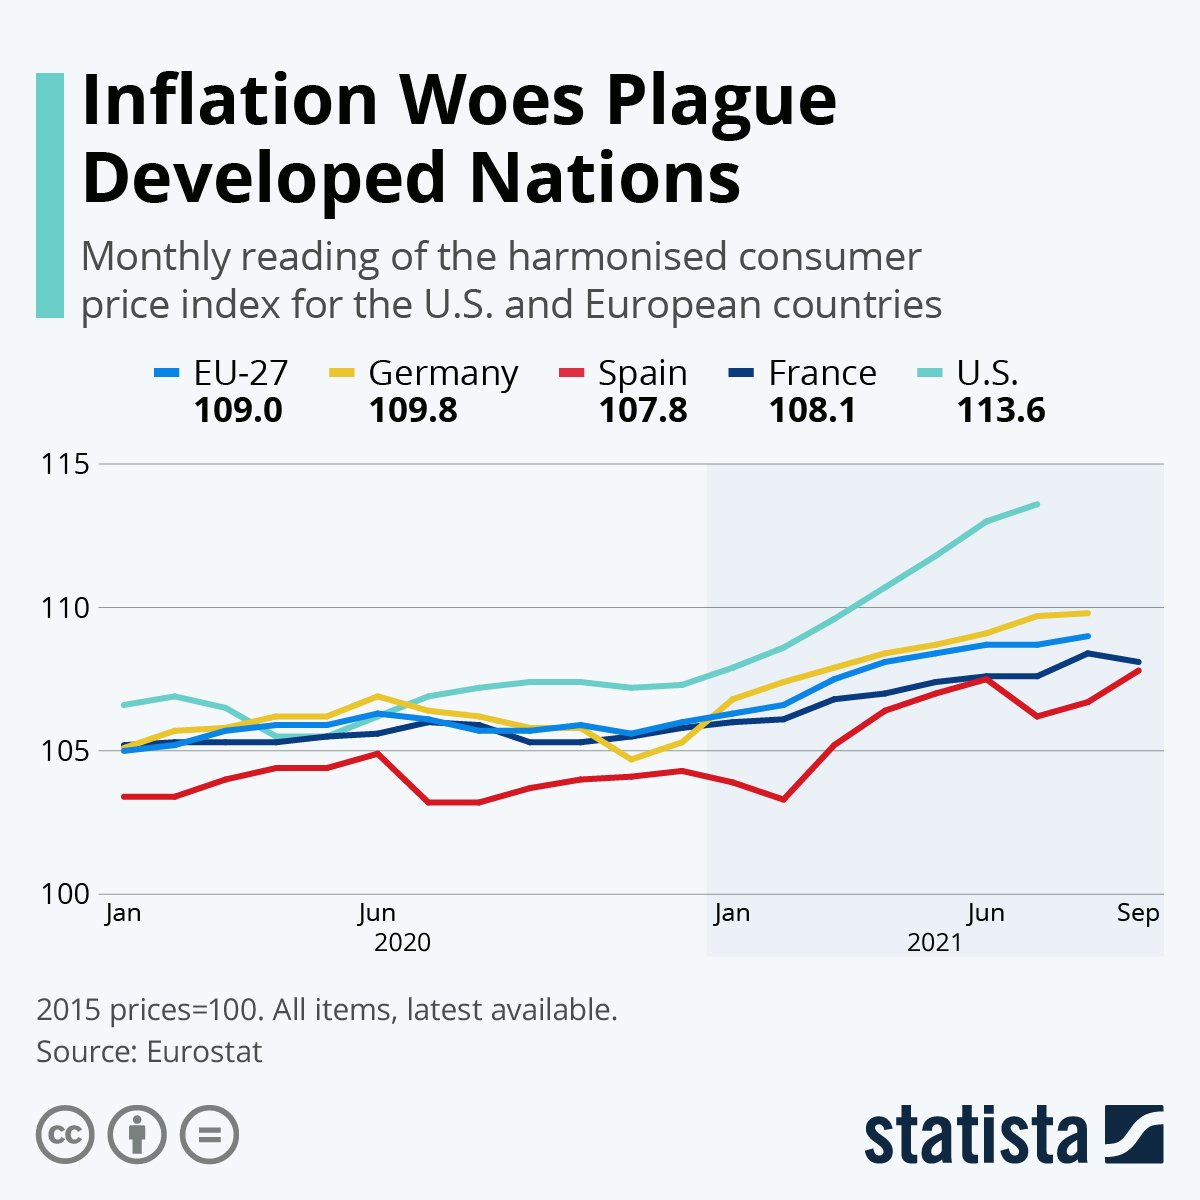 Inflation Woes Plague Developed Nations